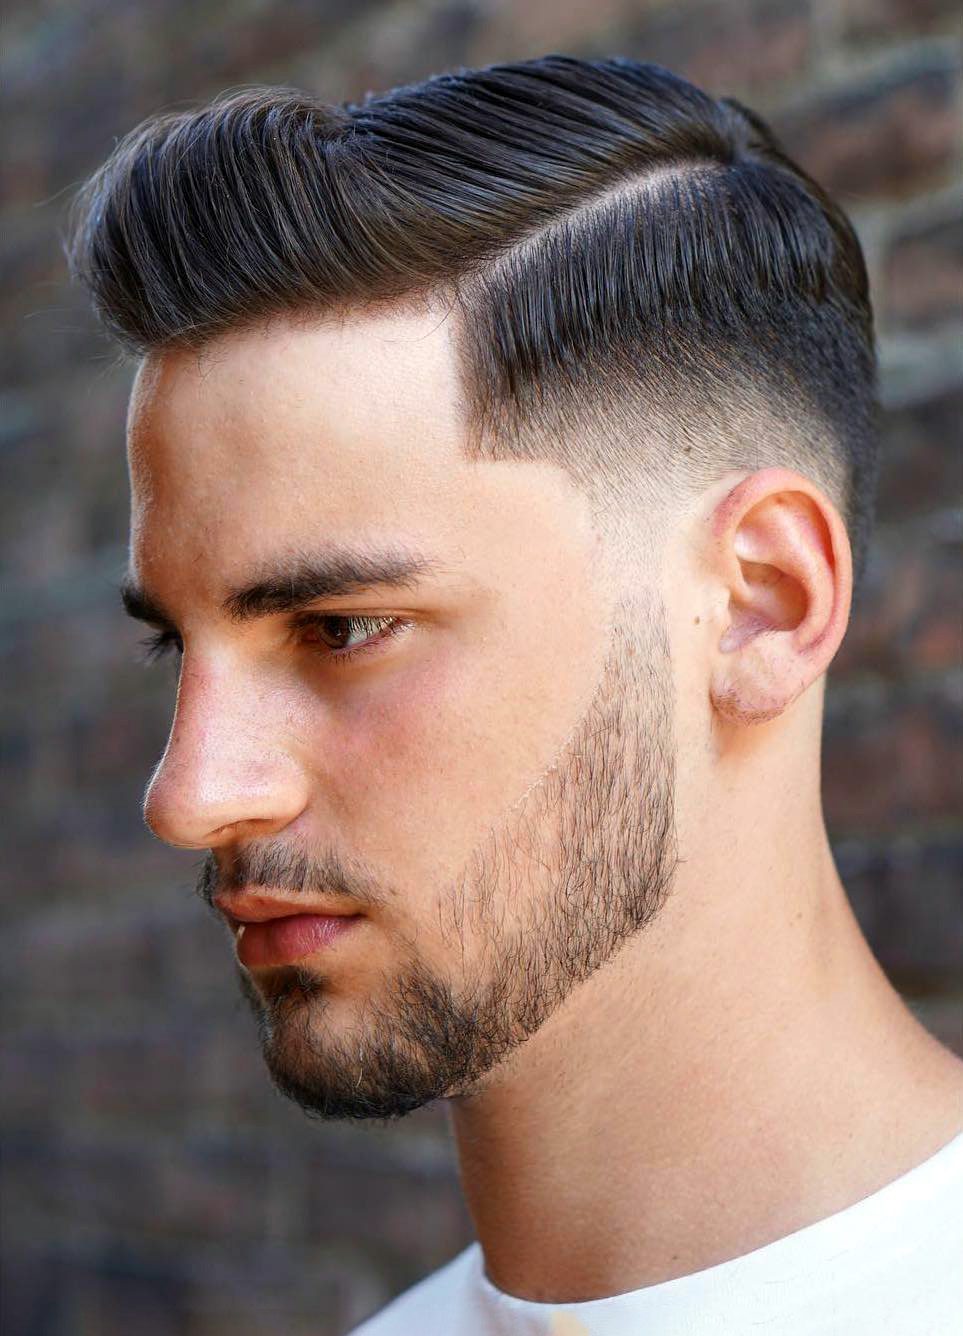 Trendy Hairstyles For Young Men - Florida Independent